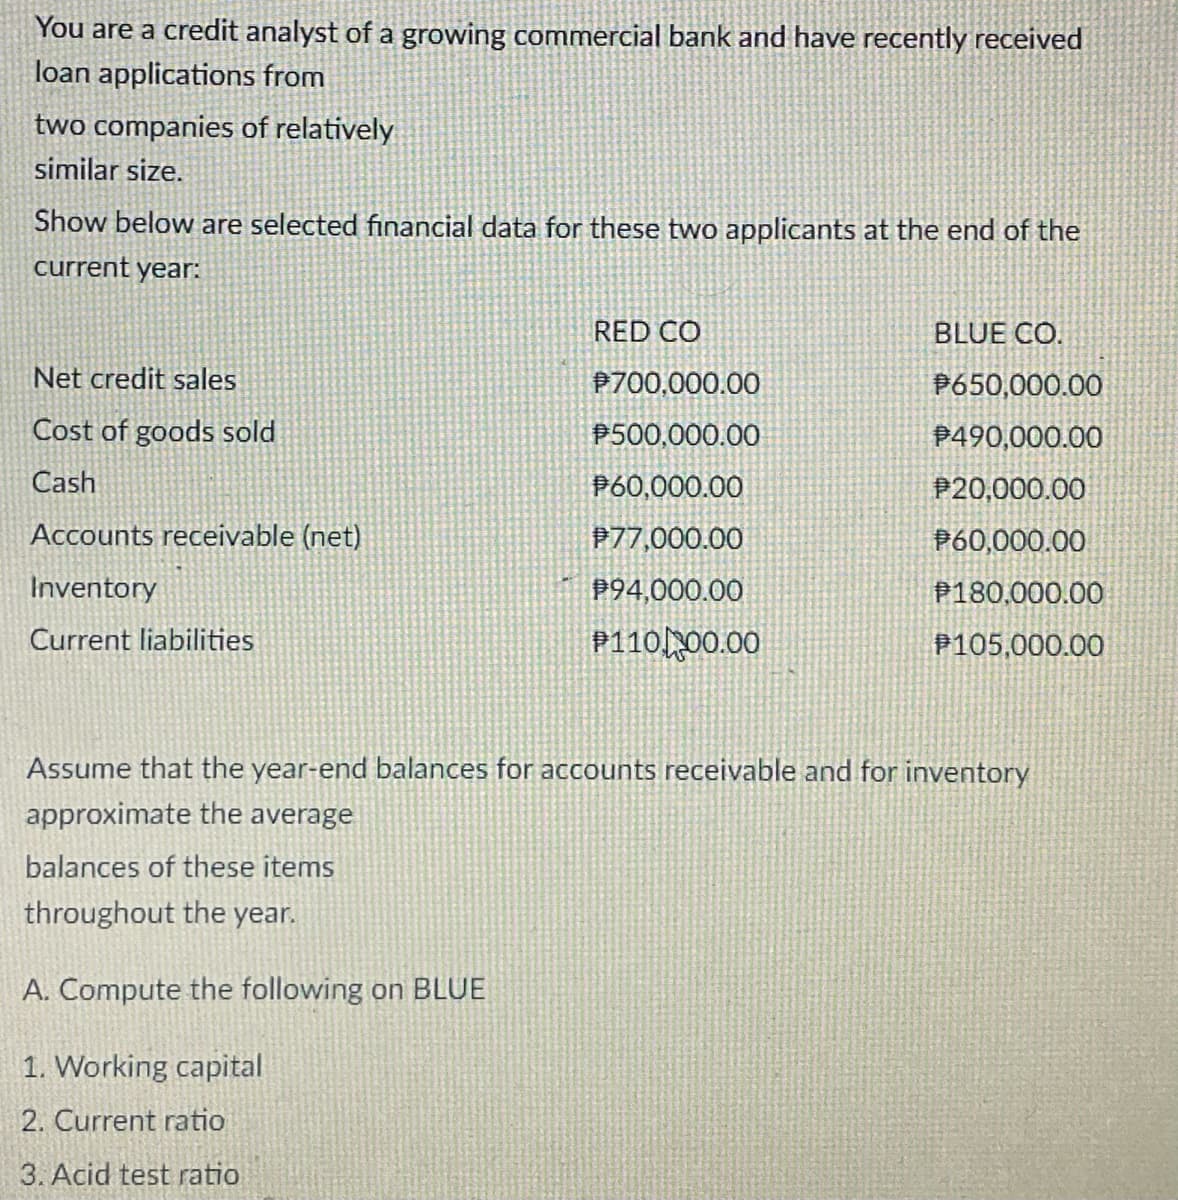 You are a credit analyst of a growing commercial bank and have recently received
loan applications from
two companies of relatively
similar size.
Show below are selected financial data for these two applicants at the end of the
current year:
RED CO
BLUE CO.
Net credit sales
P700.000.00
P650,000.00
Cost of goods sold
P500,000.00
P490,000.00
Cash
P60,000.00
P20,000.00
Accounts receivable (net)
P77,000.00
P60,000.00
Inventory
P94,000.00
P180,000.00
Current liabilities
P11000.00
P105,000.00
Assume that the year-end balances for accounts receivable and for inventory
approximate the average
balances of these items
throughout the year.
A. Compute the following on BLUE
1. Working capital
2. Current ratio
3. Acid test ratio
